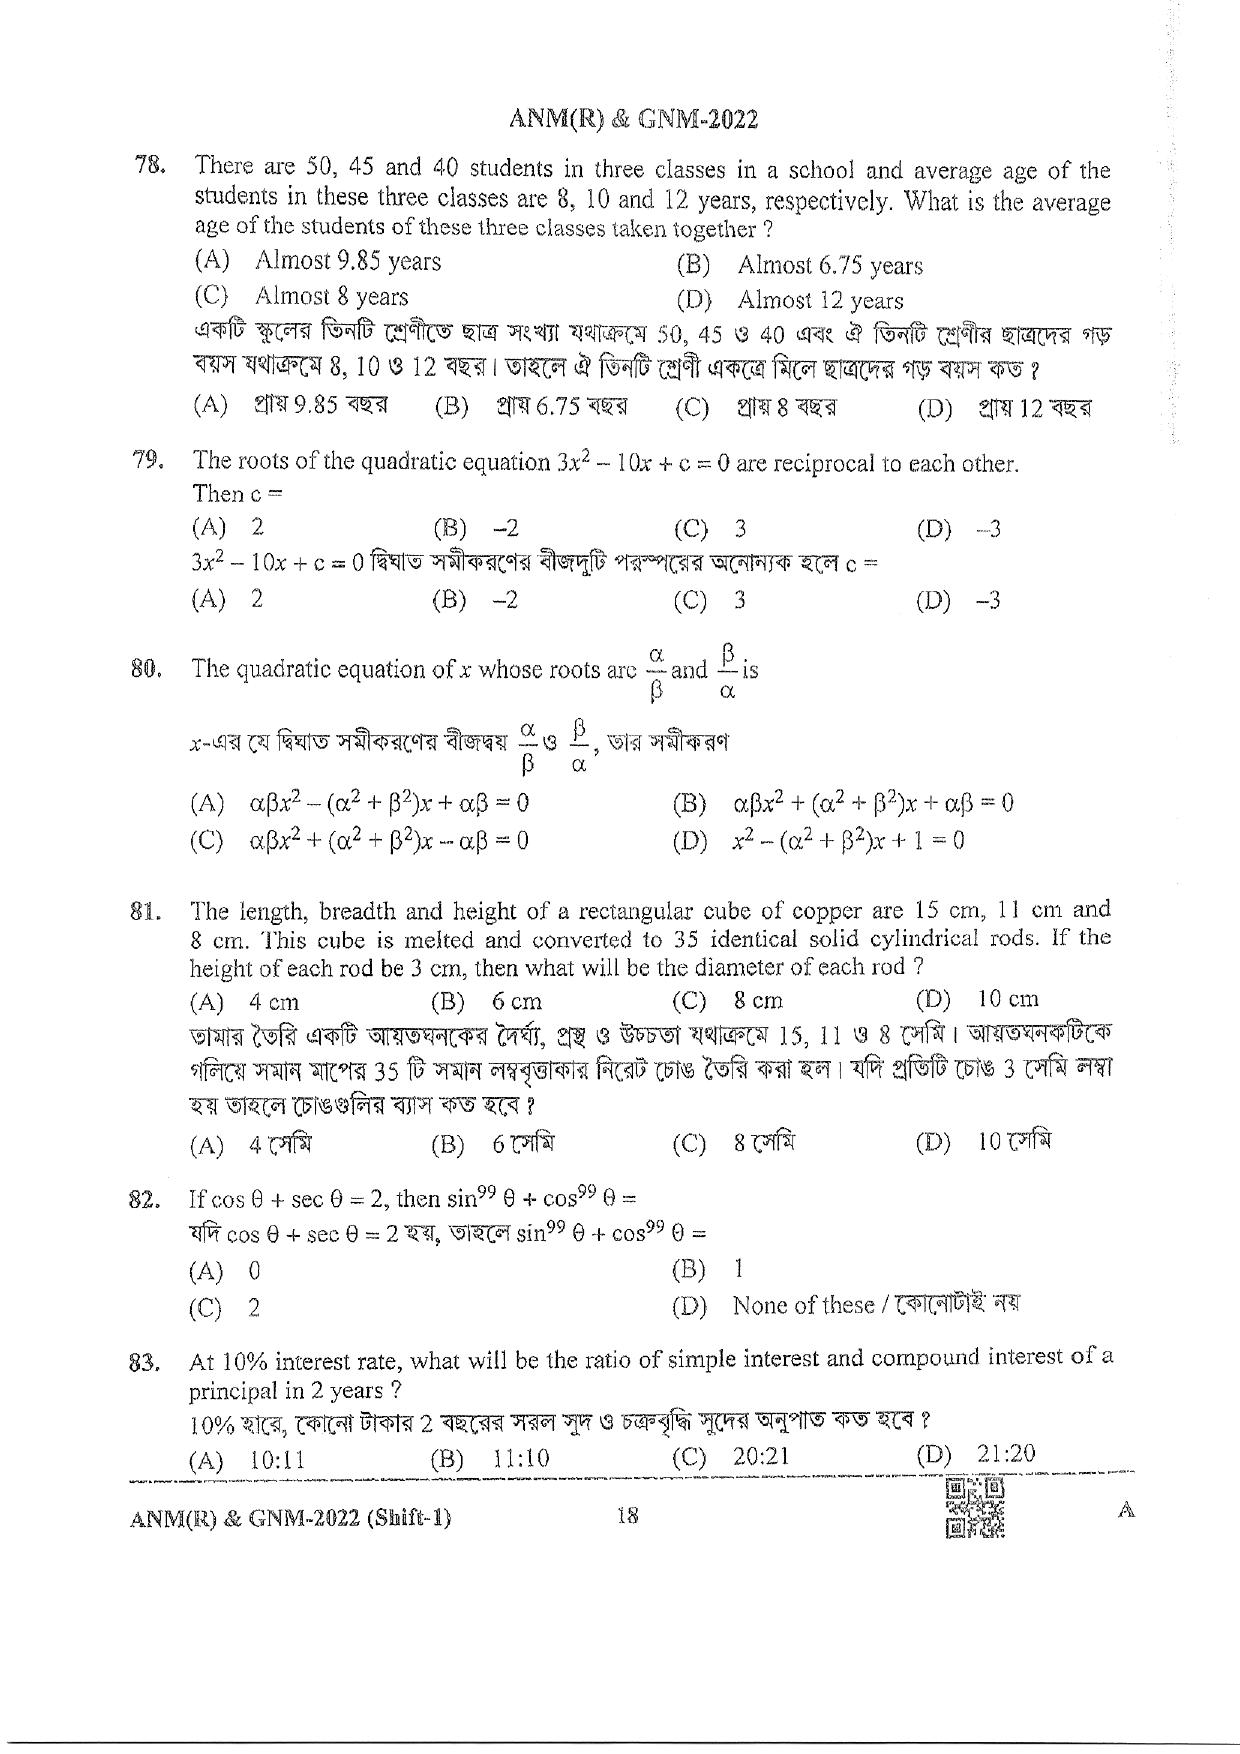 WB ANM GNM 2022 Question Paper - Page 18